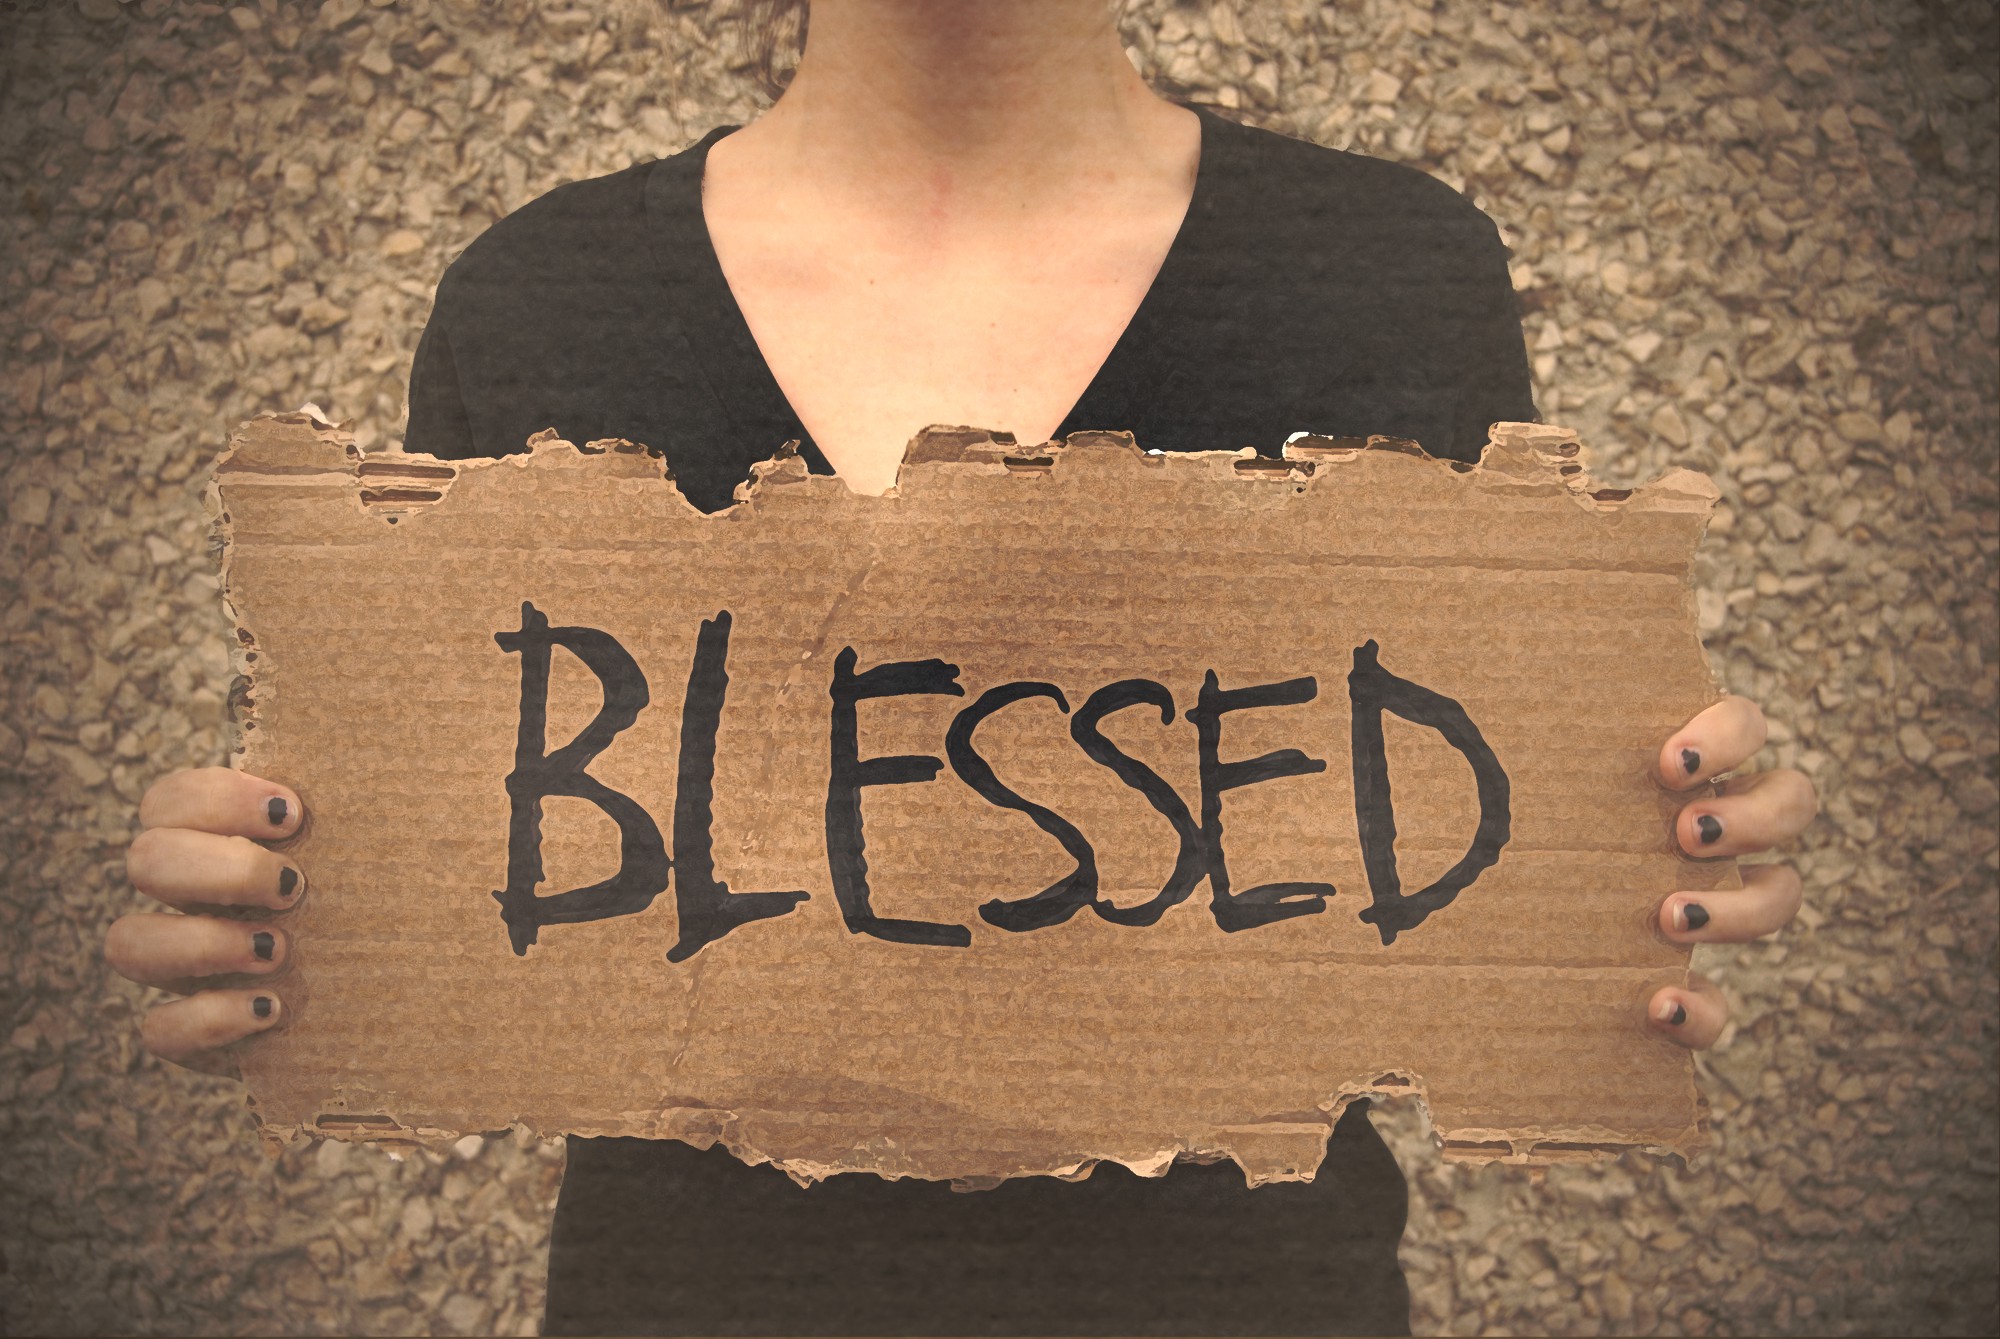 I Used To Say “I'm Blessed” Until I Asked These 2 Questions | by Josh  Bocanegra | Josh Bocanegra | Medium